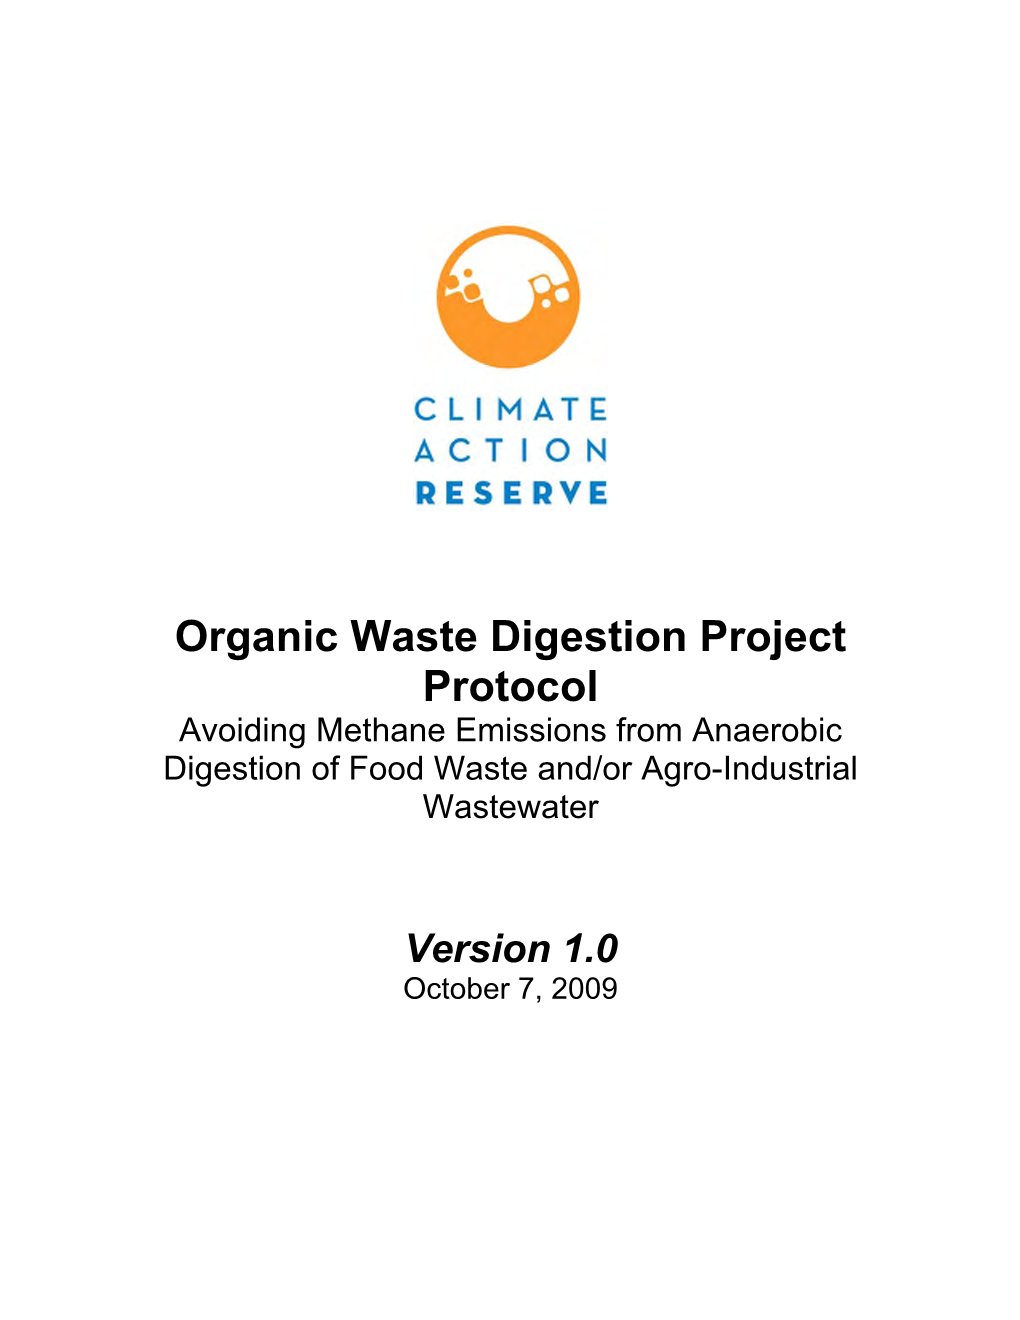 Organic Waste Digestion Project Protocol Version 1.0, October 2009